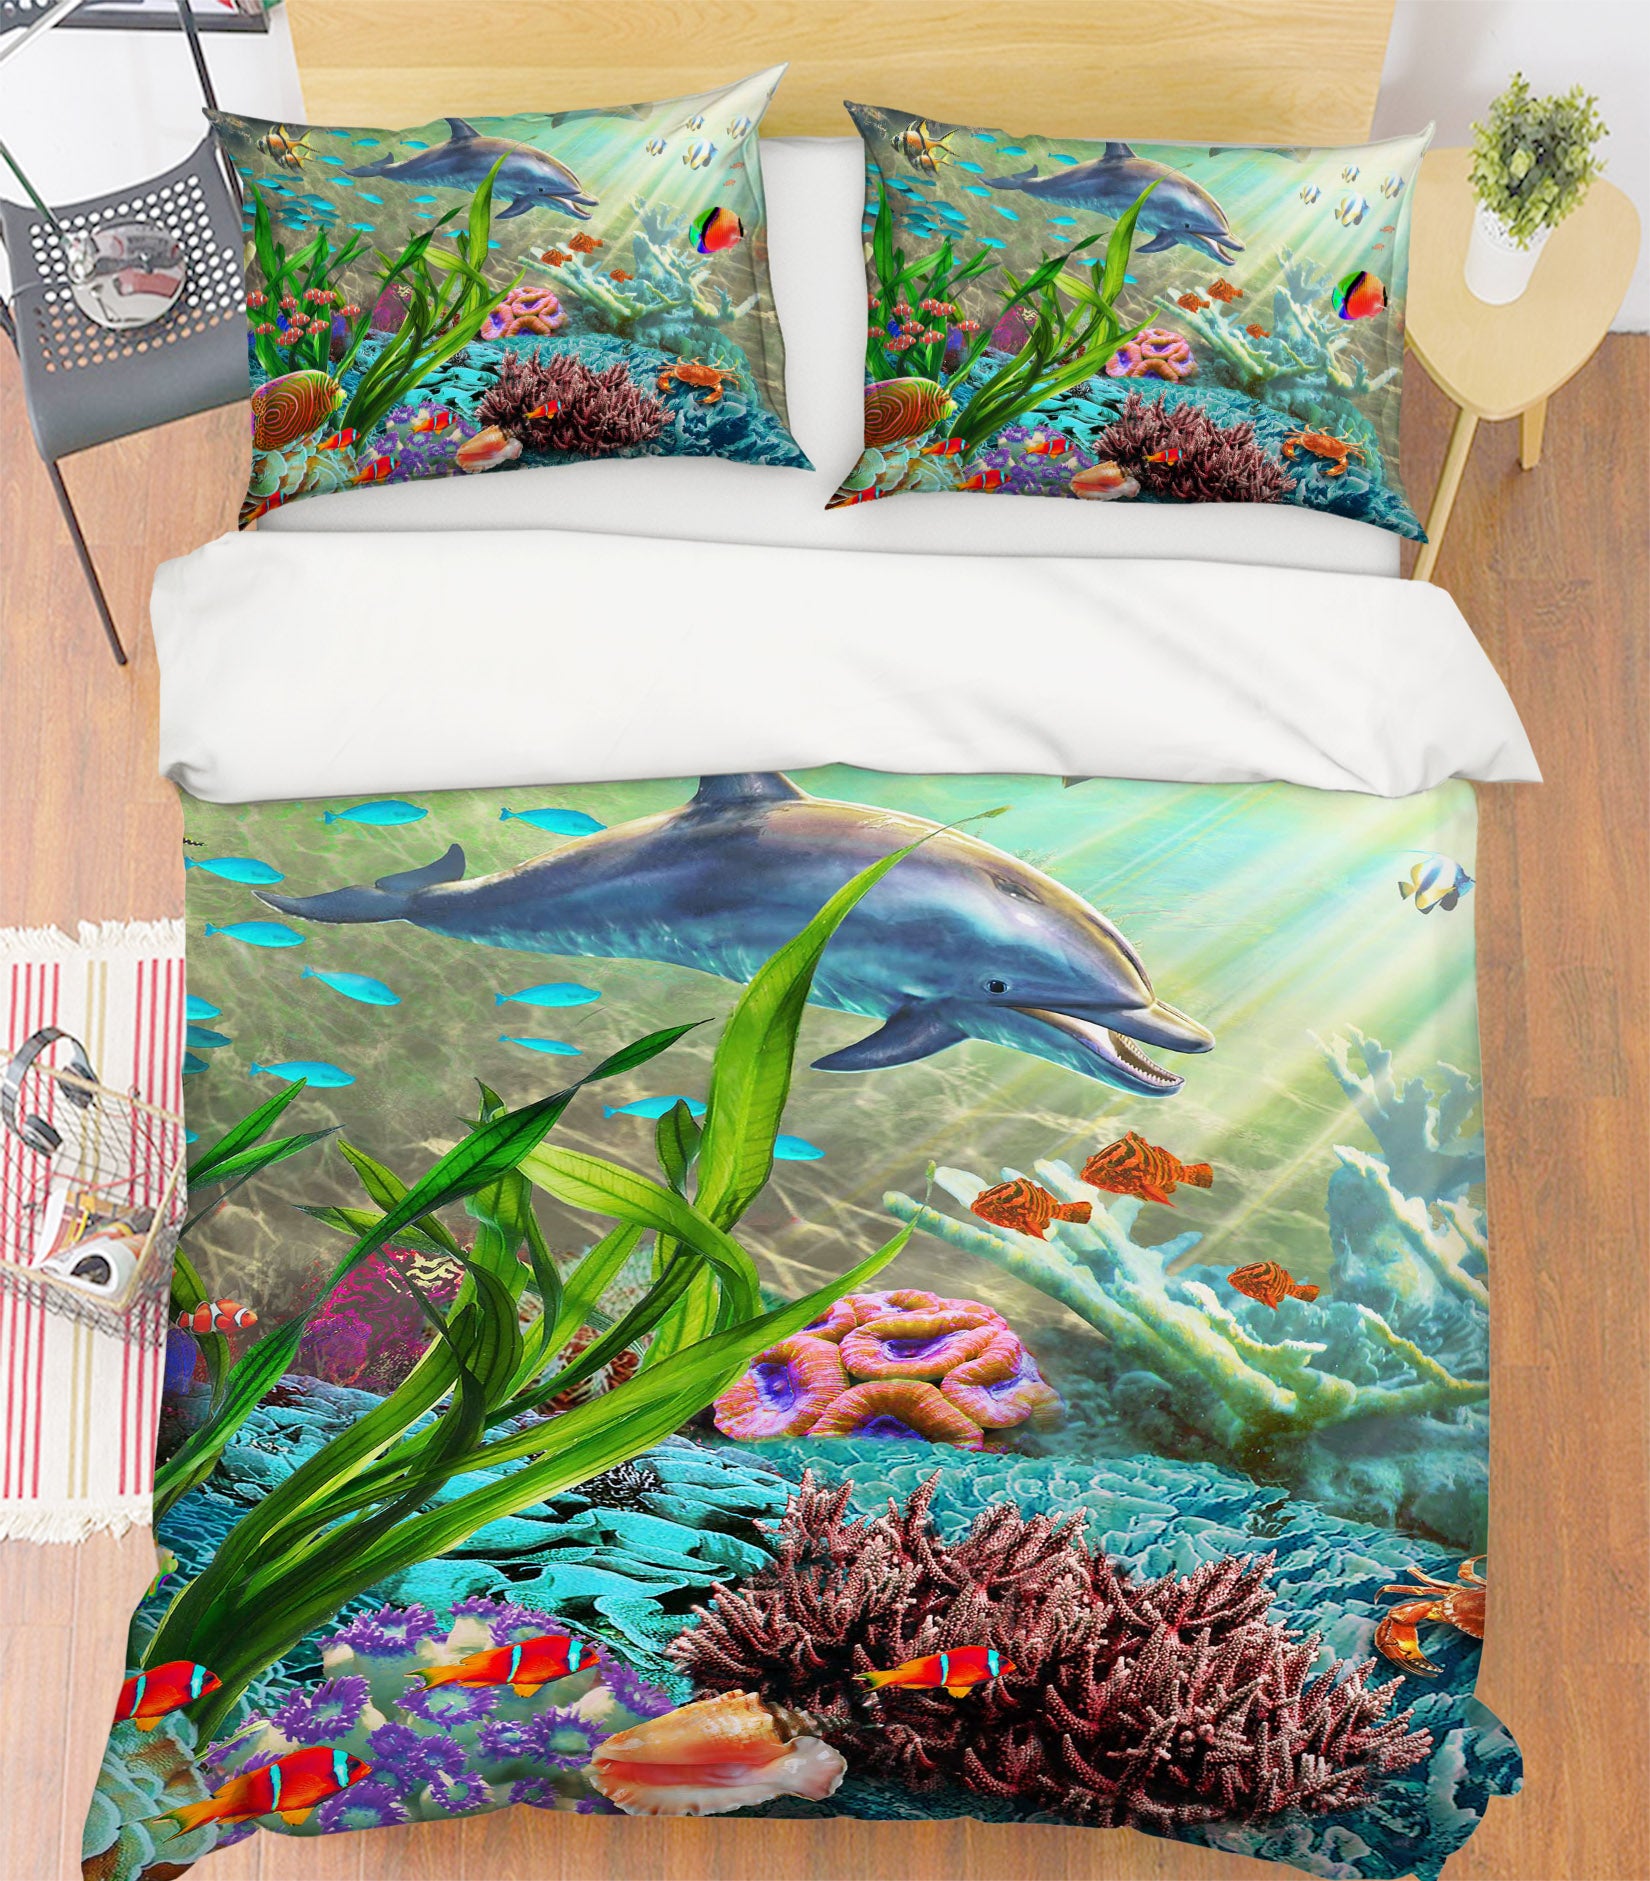 3D Cute Dolphin 2115 Adrian Chesterman Bedding Bed Pillowcases Quilt